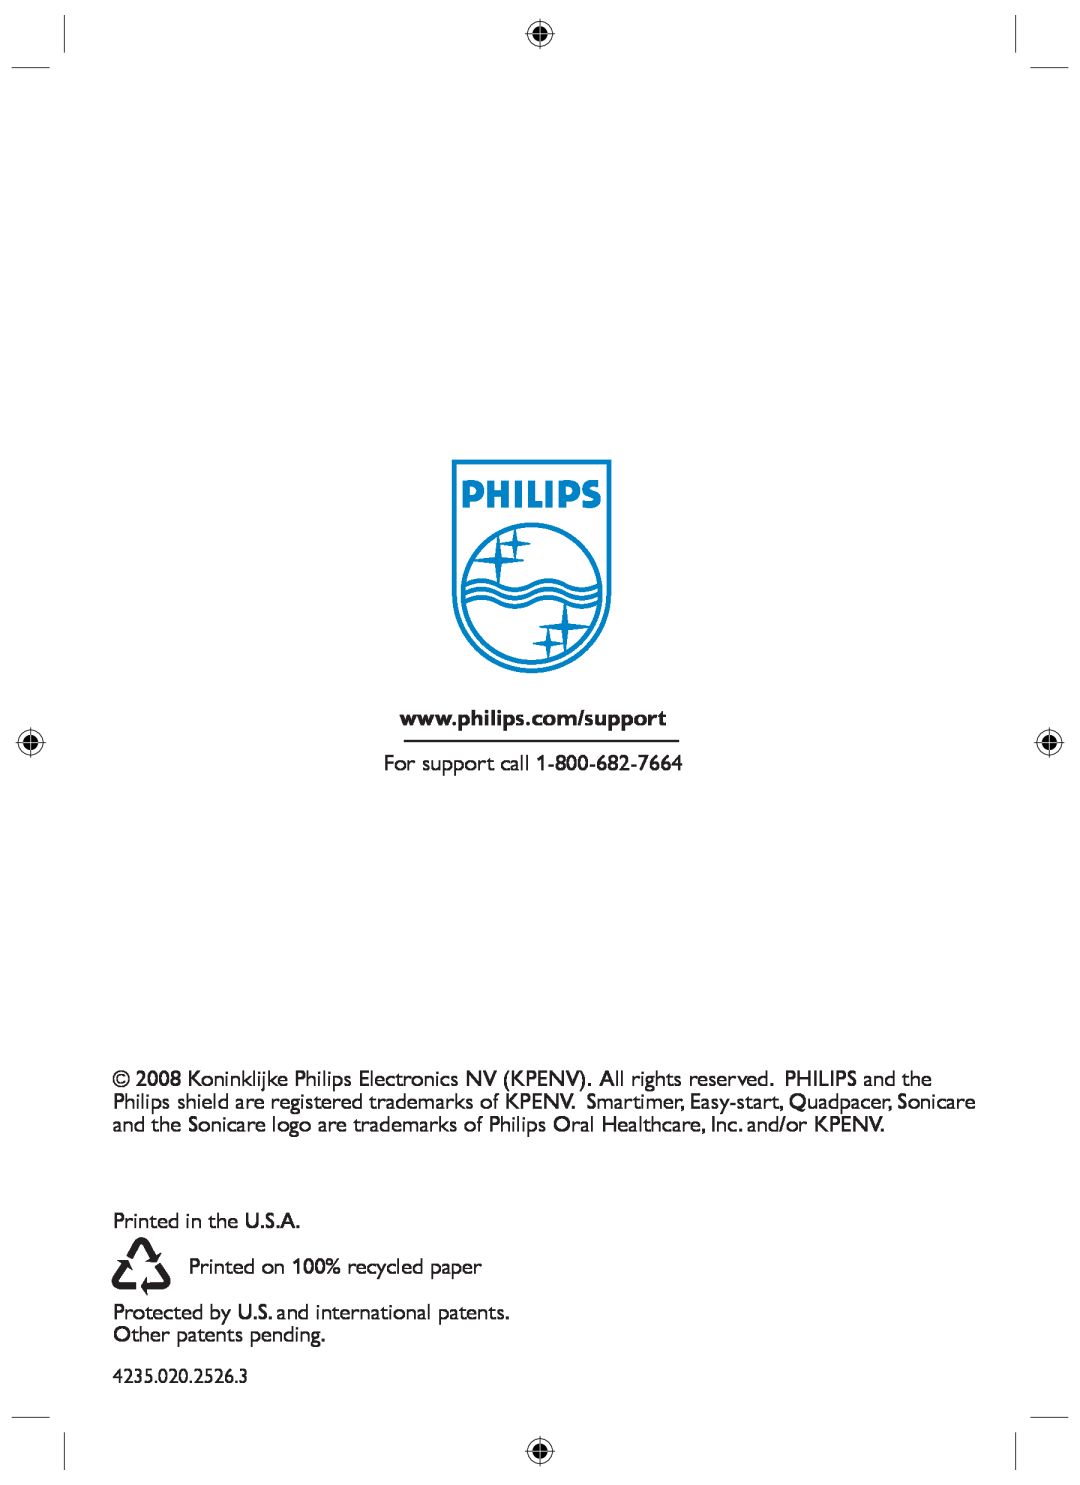 Philips HX6710 manual For support call, Printed in the U.S.A Printed on 100% recycled paper 